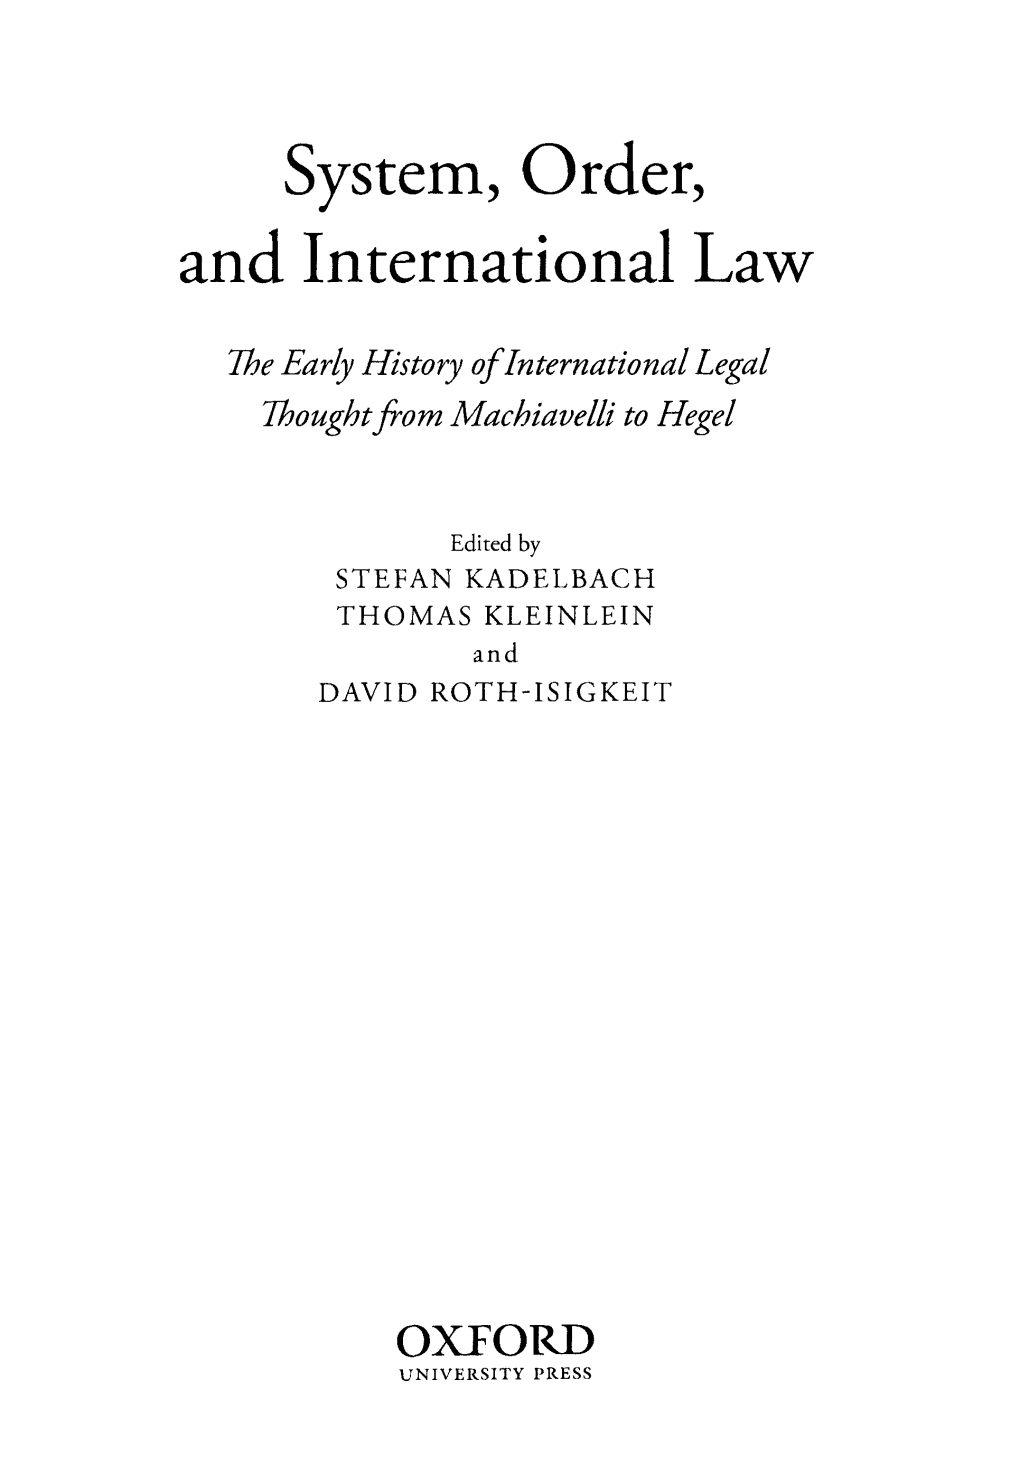 System, Order, and International Law the Early History of International